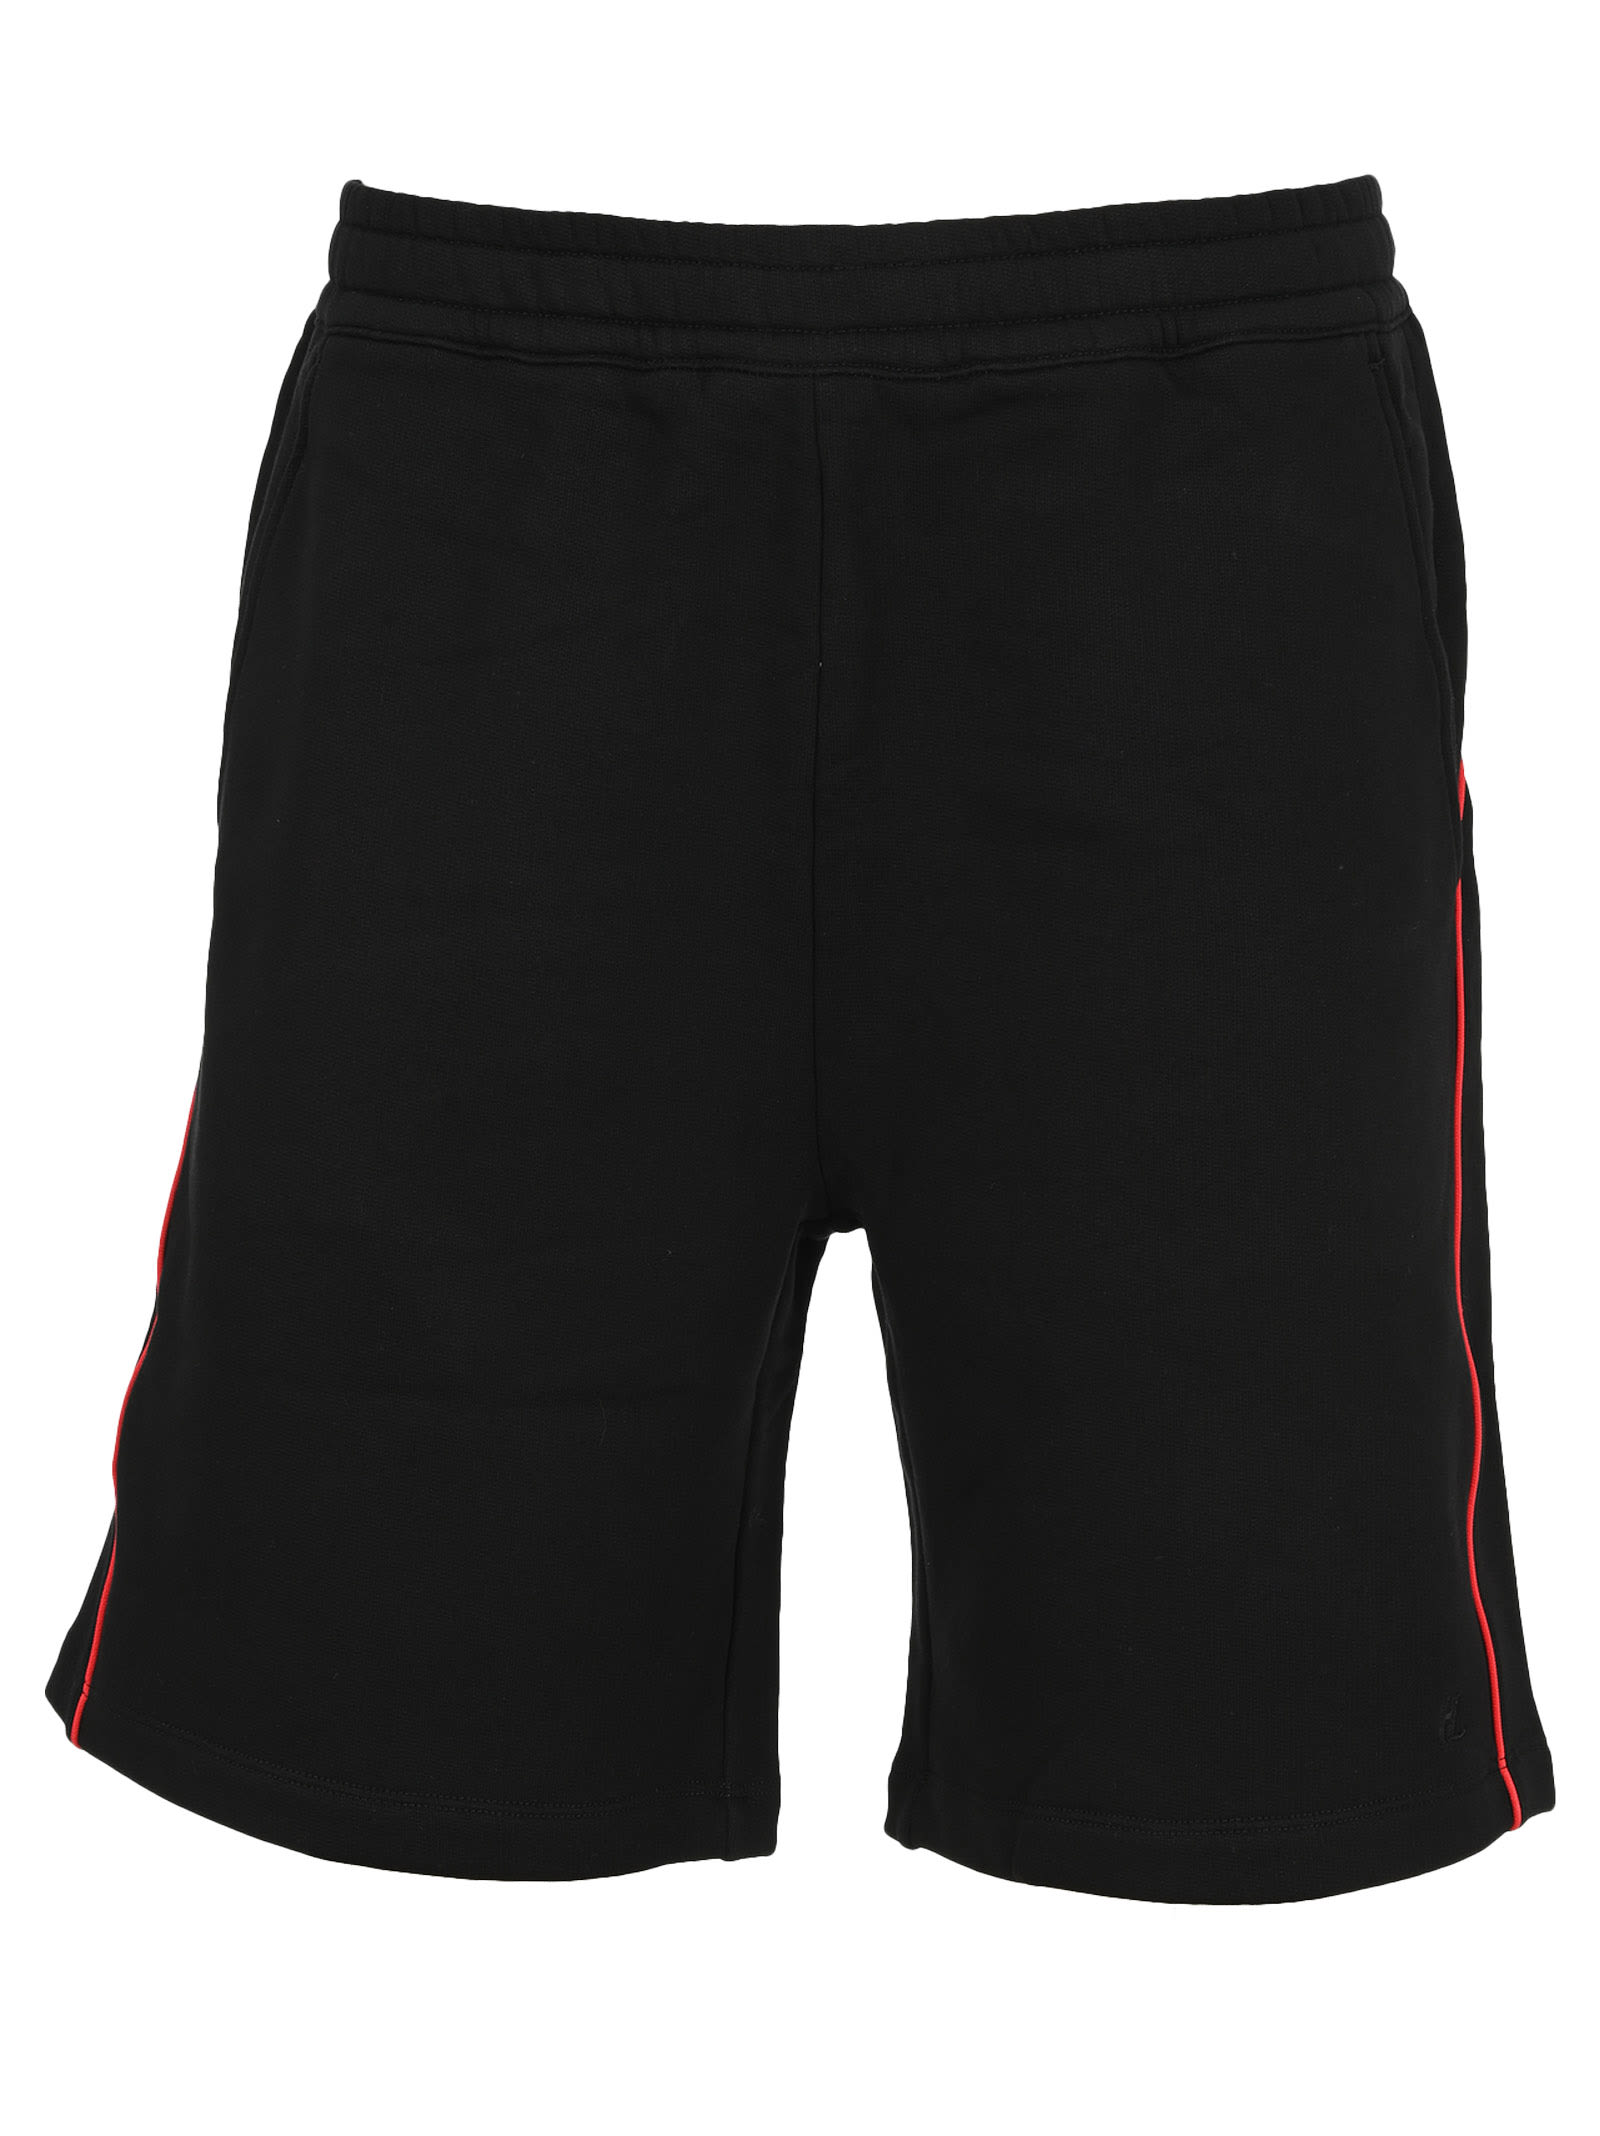 Helmut Lang Piped Shorts